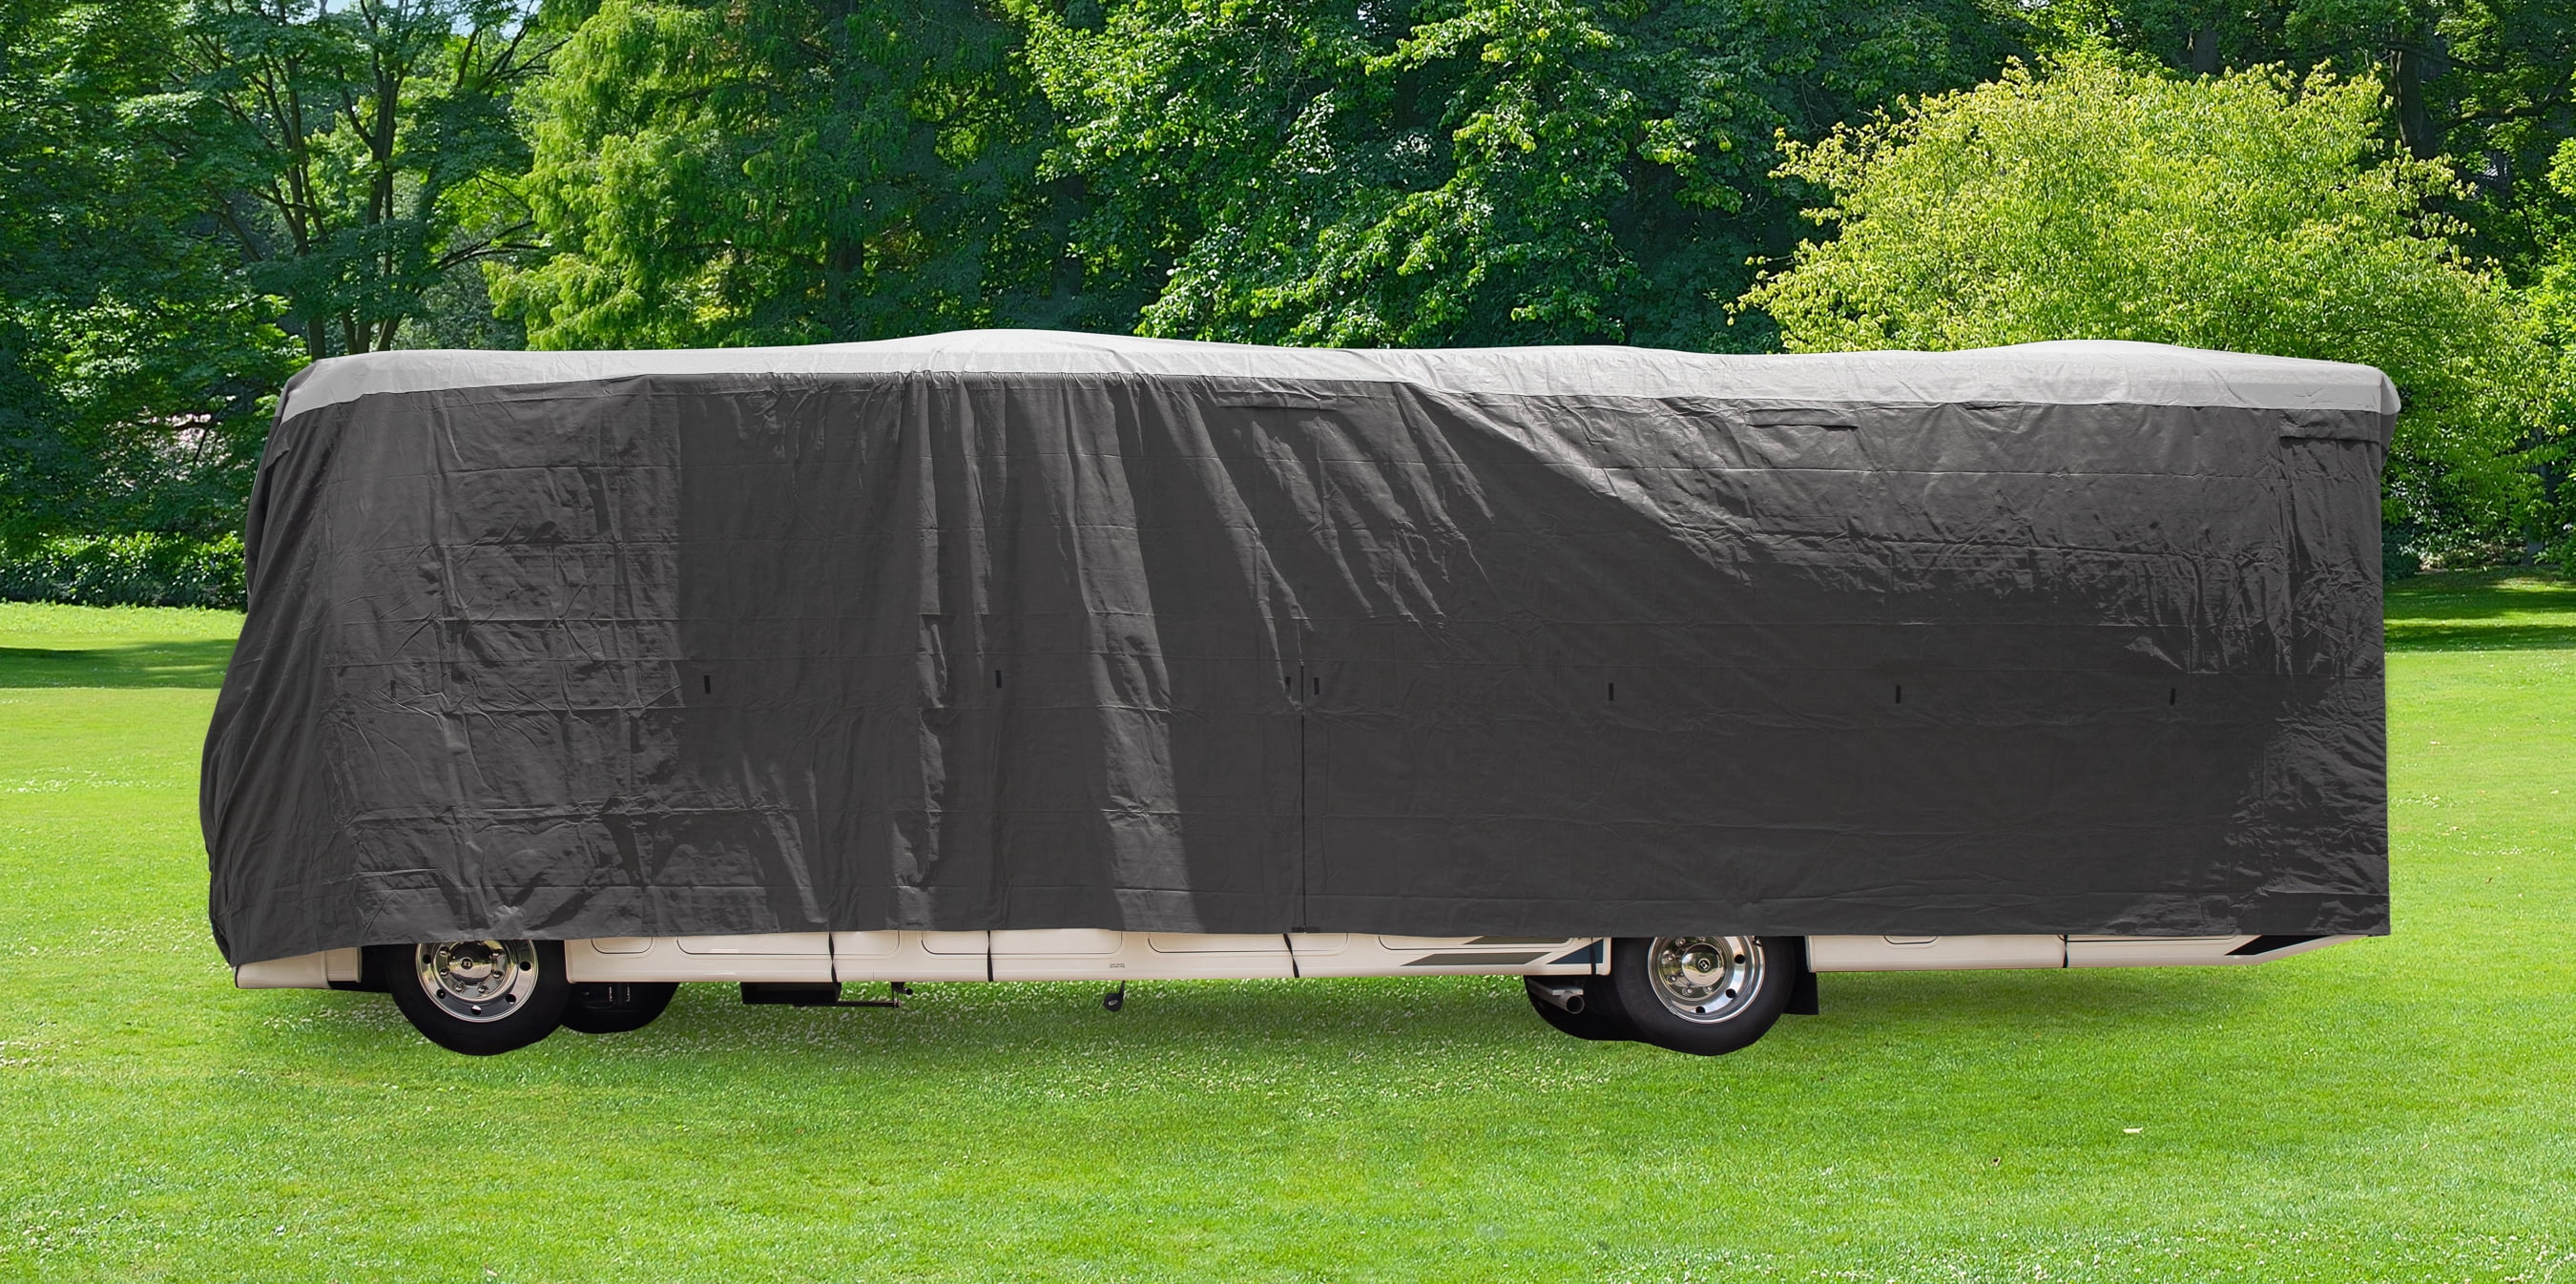 Camco ULTRAGuard RV Cover Fits Class A RVs 36 to 38-feet Extremely  Durable Design that Protects Against the Elements (45735)